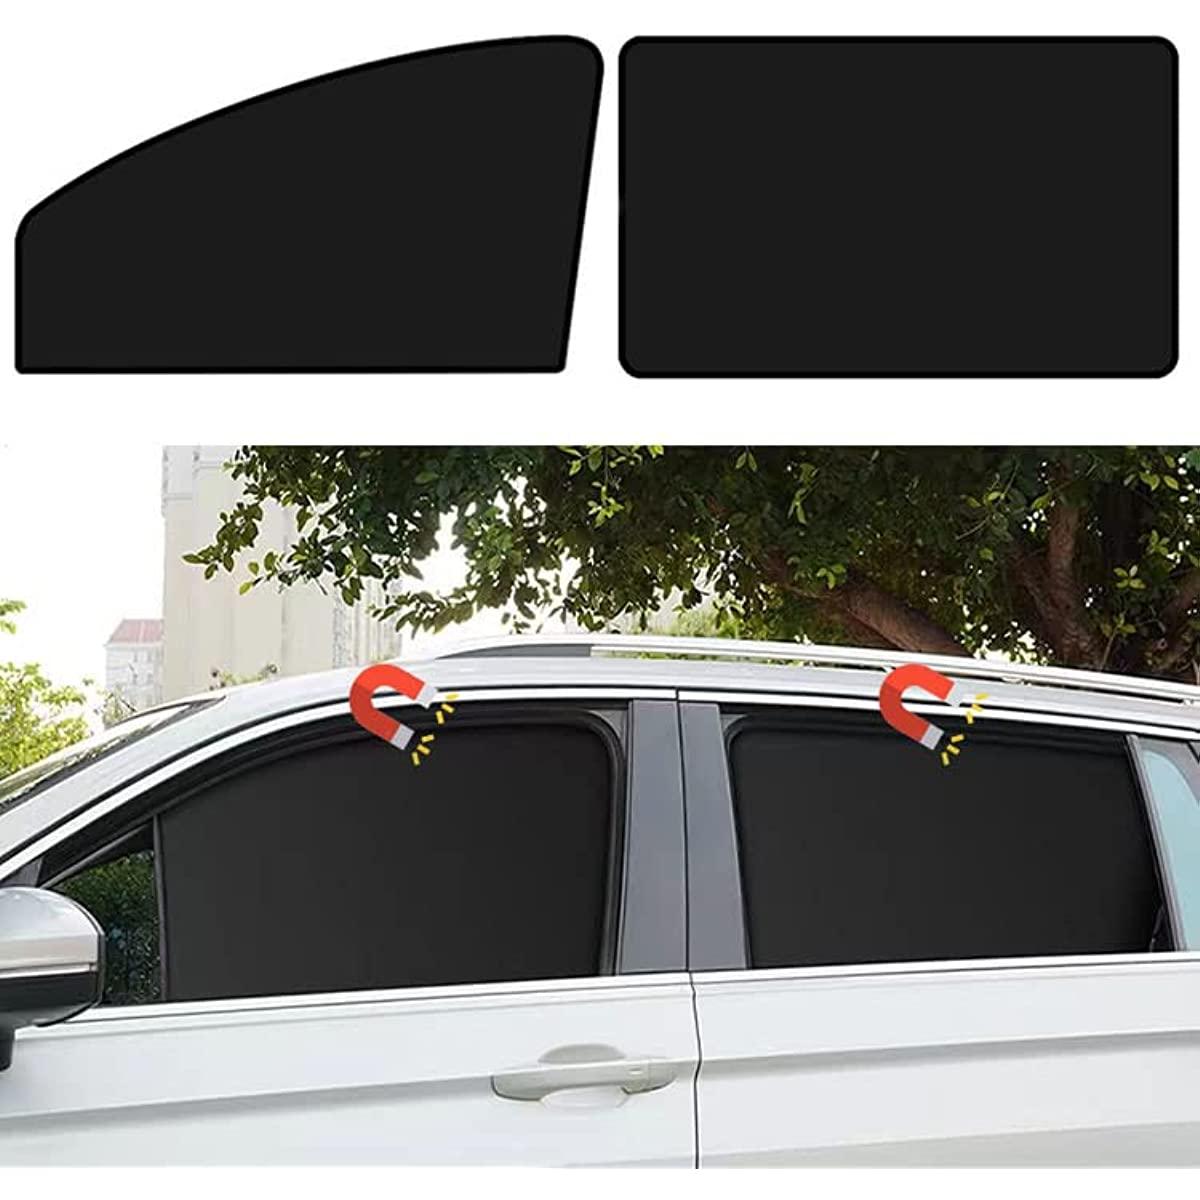 Car Side Window Sun Shades, Window Sunshades Privacy Curtains, 100% Block Light for Breastfeeding, Taking a nap, Changing Clothes, Camping - KinglyDay